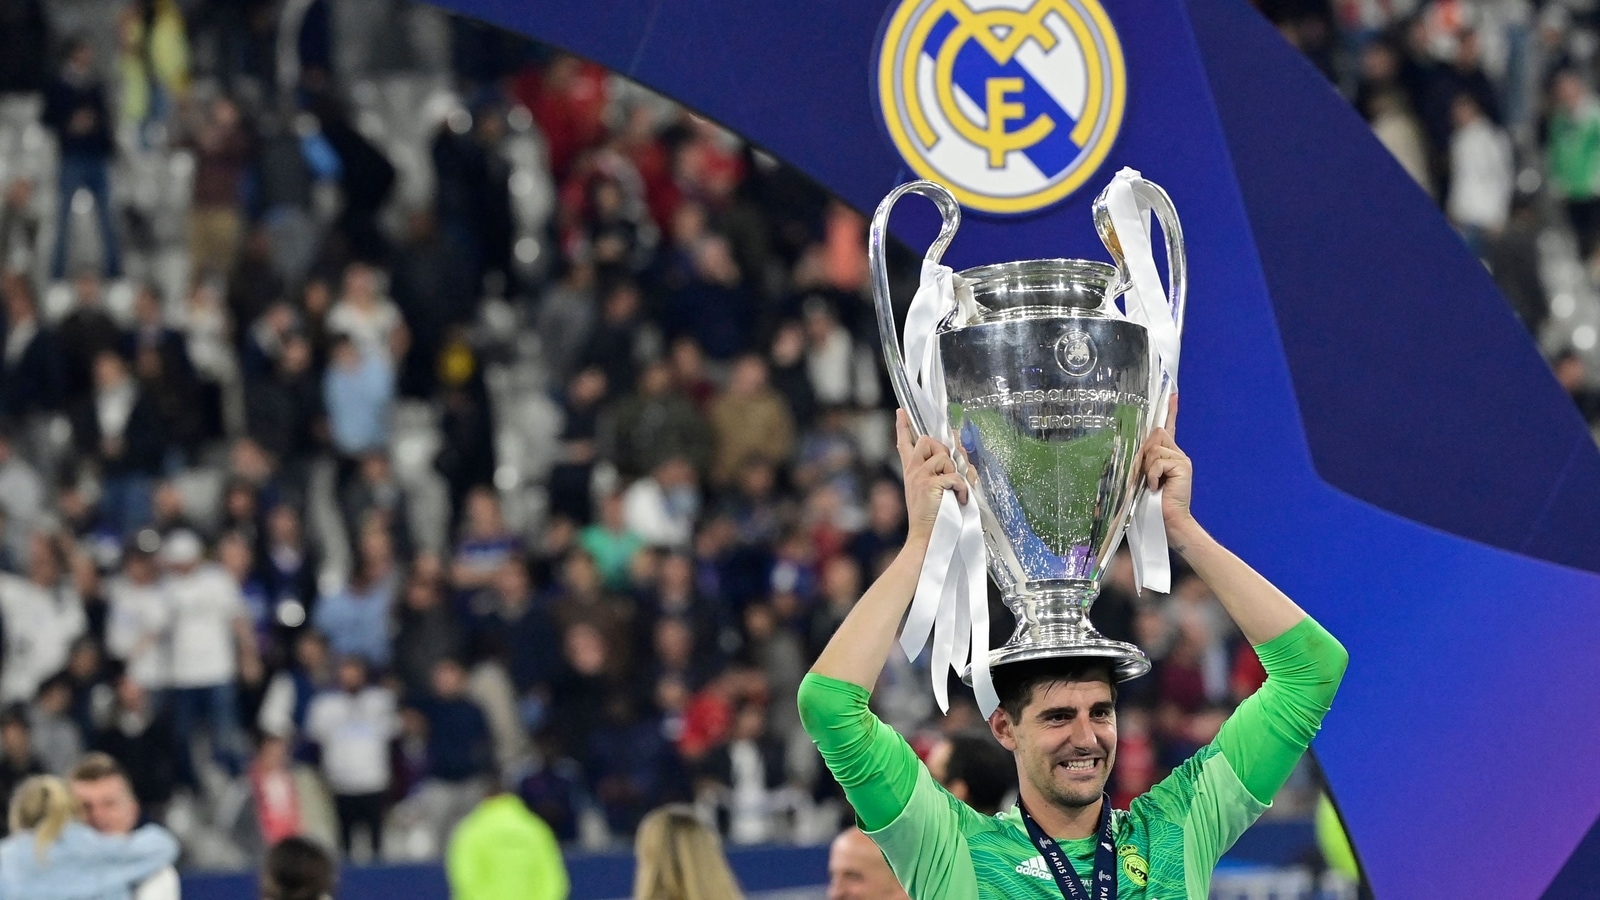 ‘Buffon never won the Champions League’: Real Madrid’s Thibaut Courtois after UCL final heroics